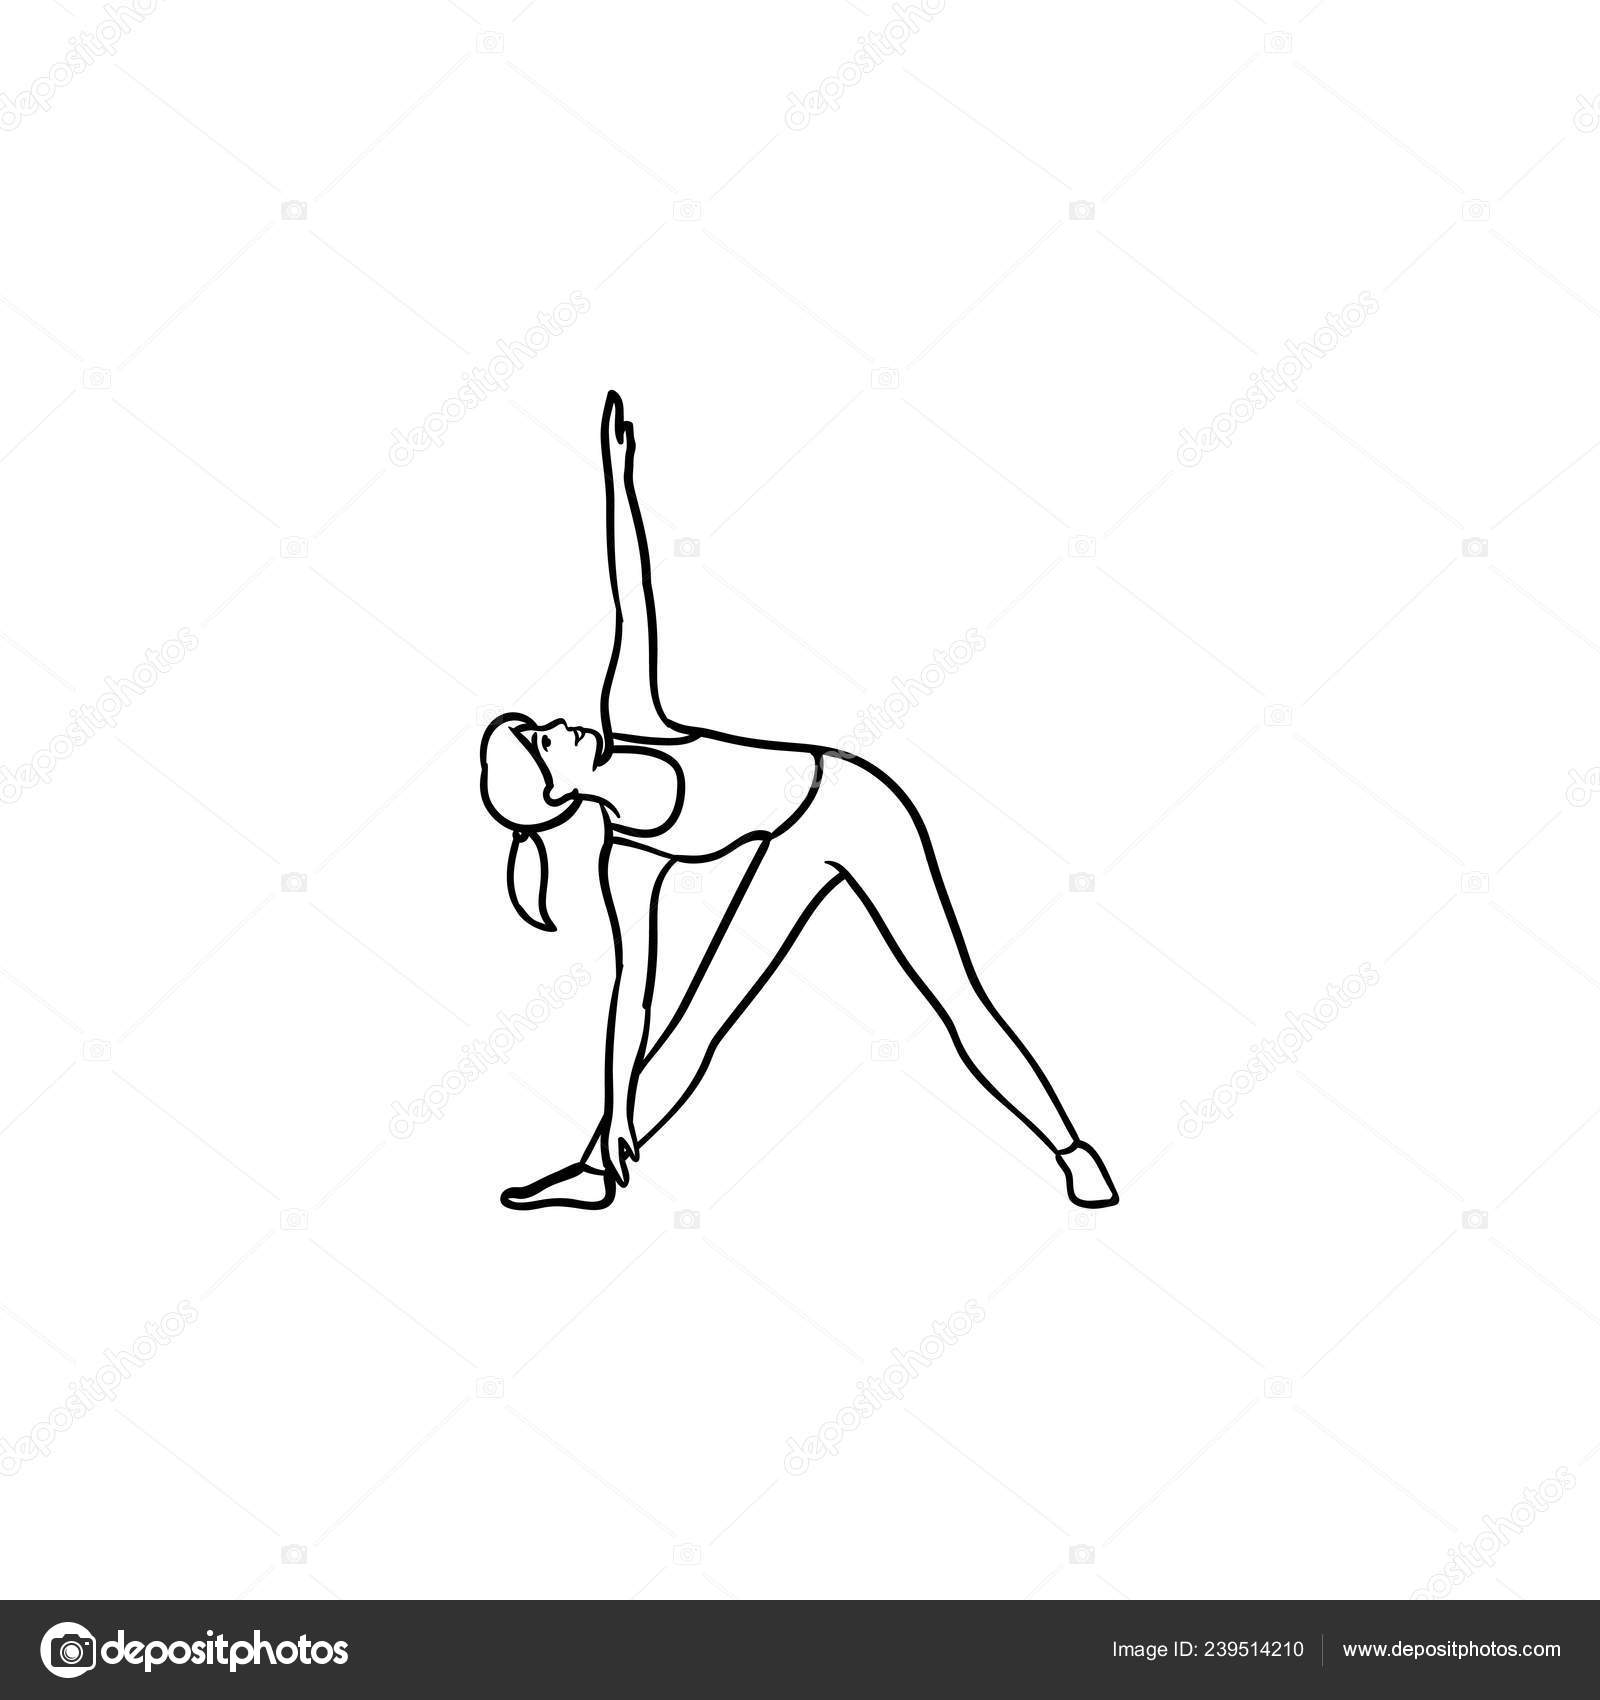 Yoga pose, woman to do the splits silhouette, vector outline portrait,  gymnast figure, black and white contour outline drawing. Isolated on  white:: tasmeemME.com